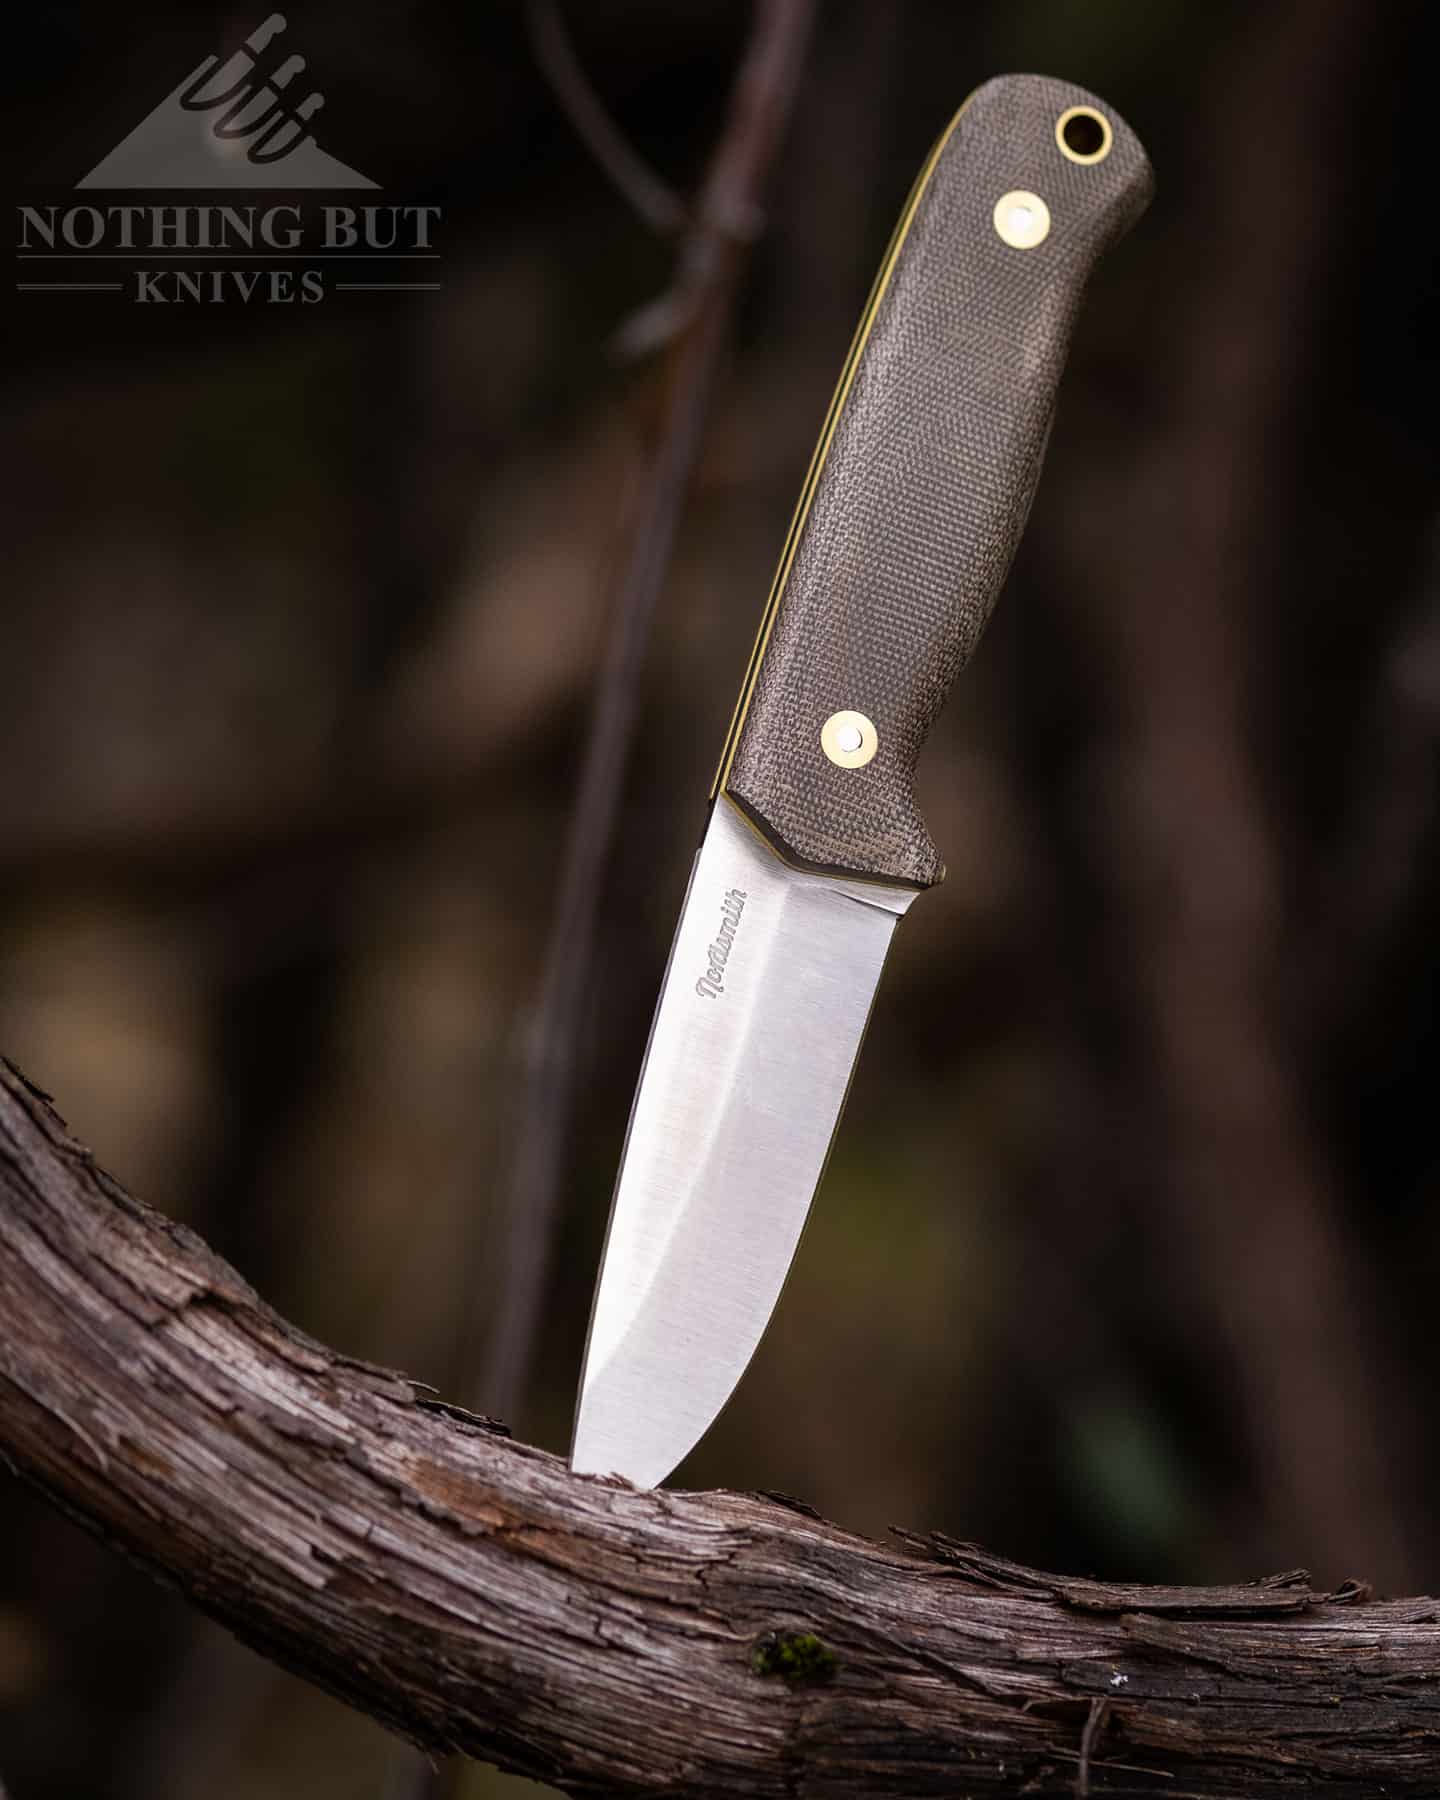 The Nordsmith Pilgrim Lt is a premium bushcraft knife that is comparable to the Reiff F4.